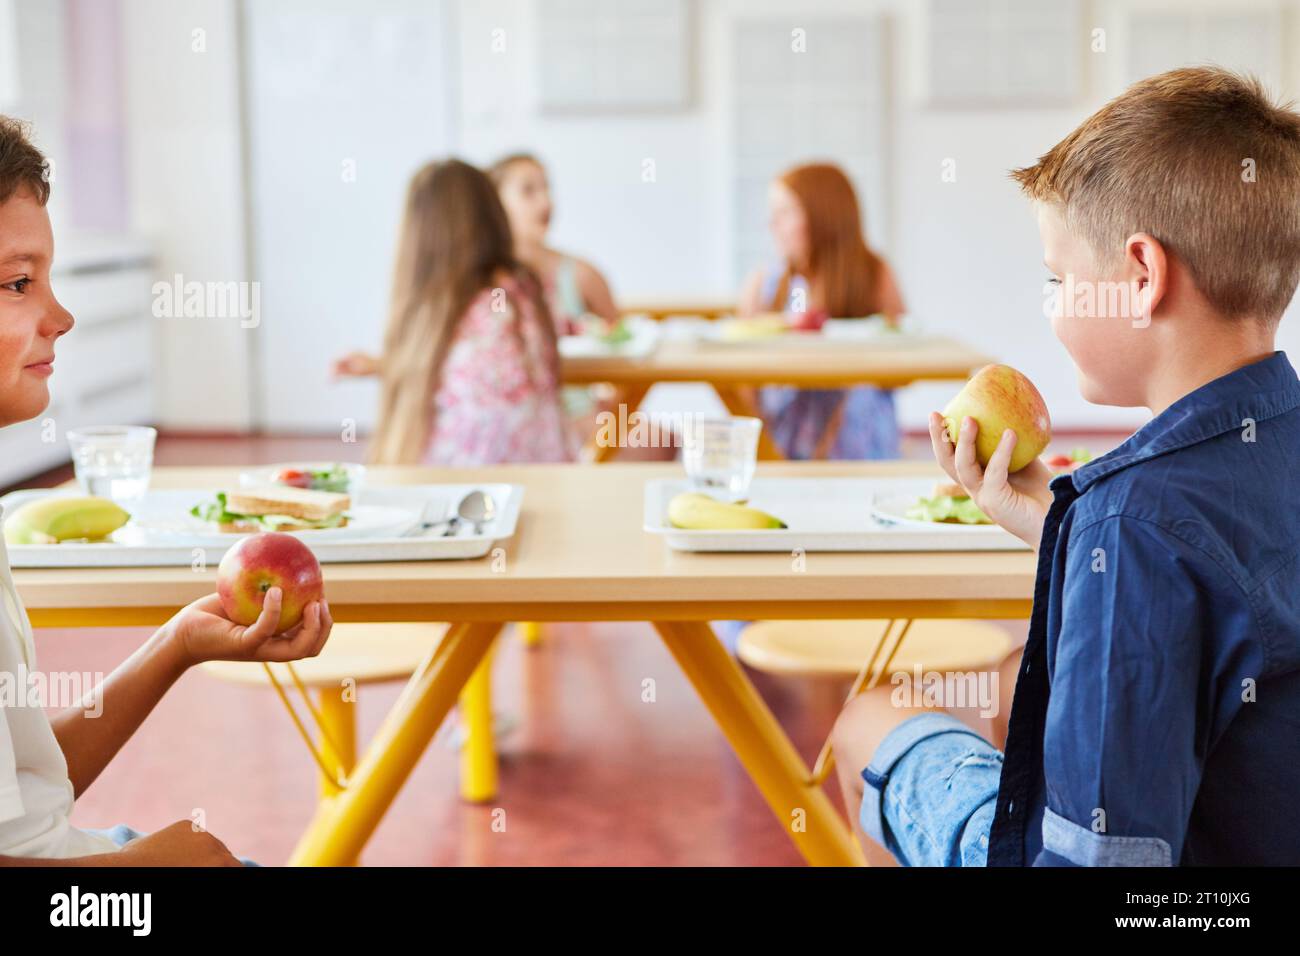 https://c8.alamy.com/comp/2T10JXG/male-friends-eating-apples-while-sitting-together-at-table-in-school-during-lunch-time-2T10JXG.jpg